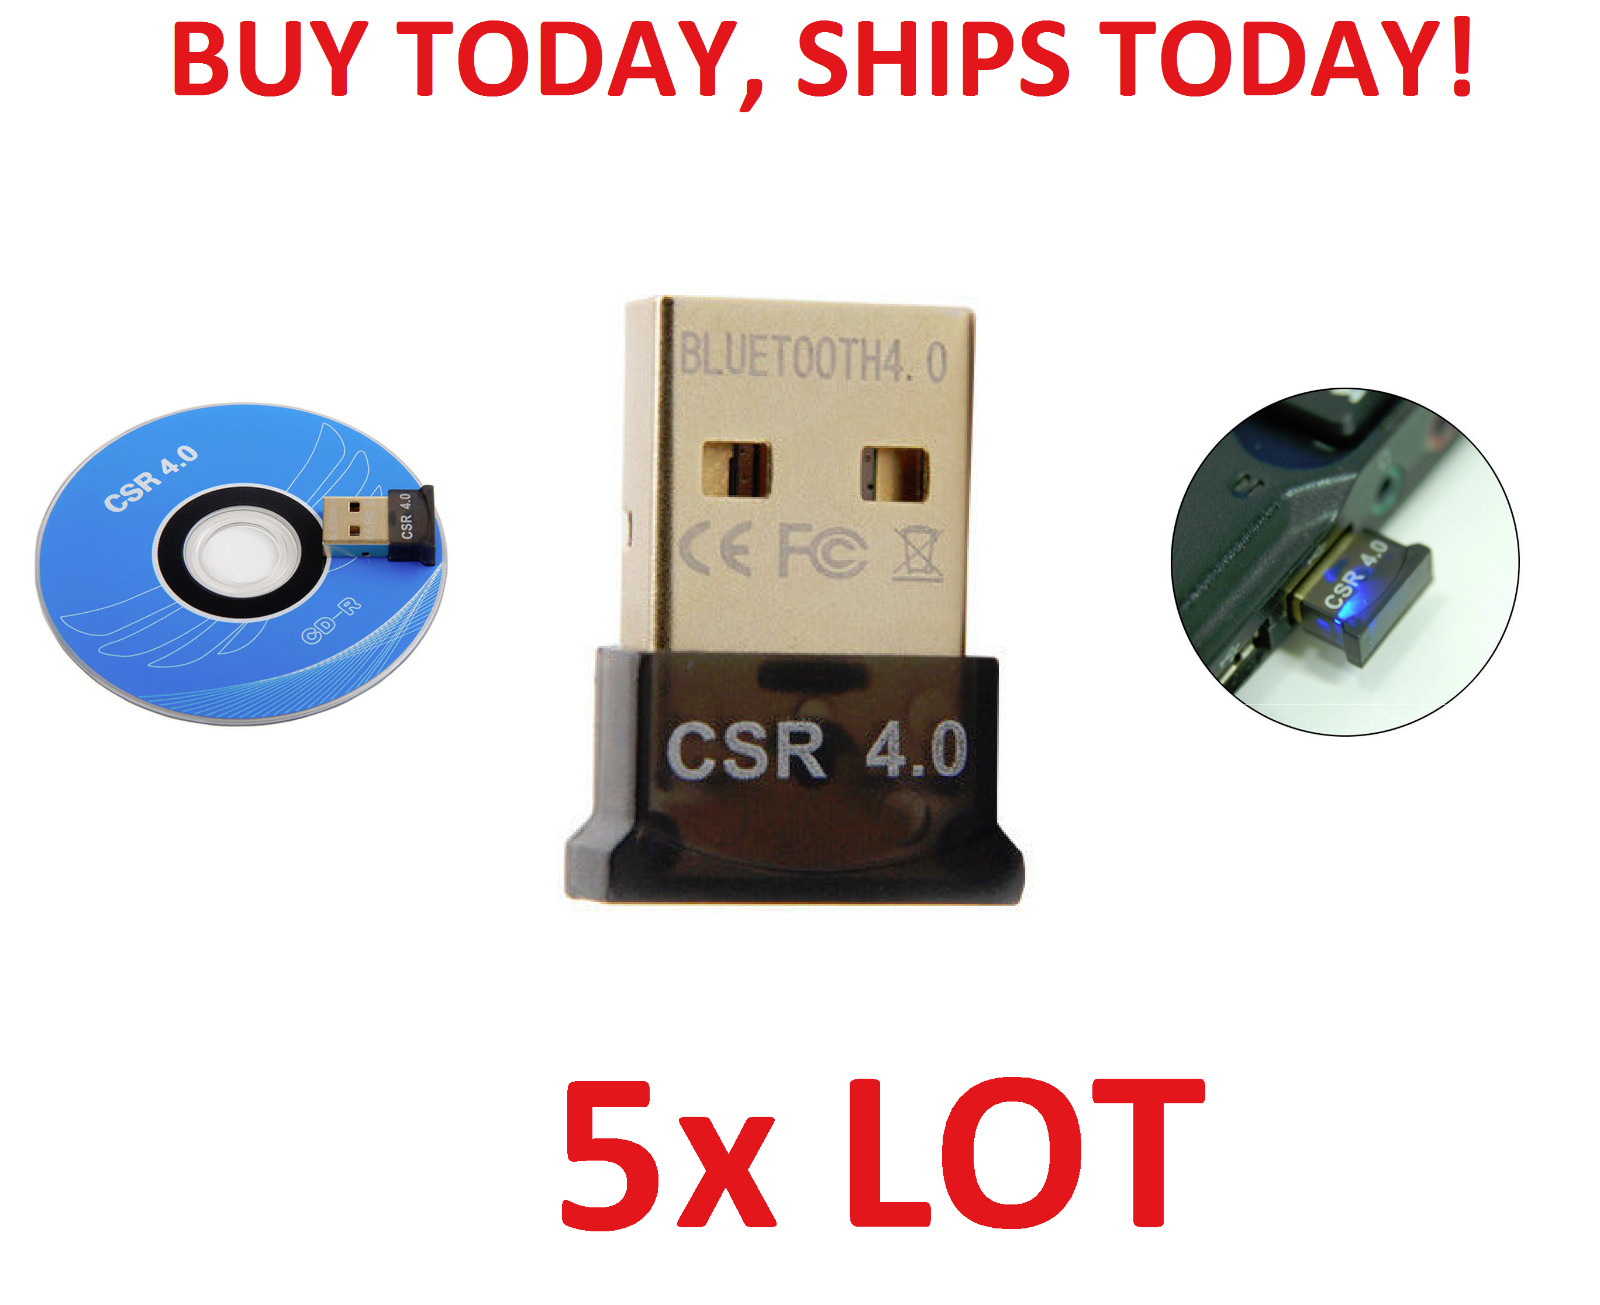 5pc LOT Bluetooth 4.0 USB 2.0 CSR 4.0 Wireless Dongle Adapter for PC LAPTOP